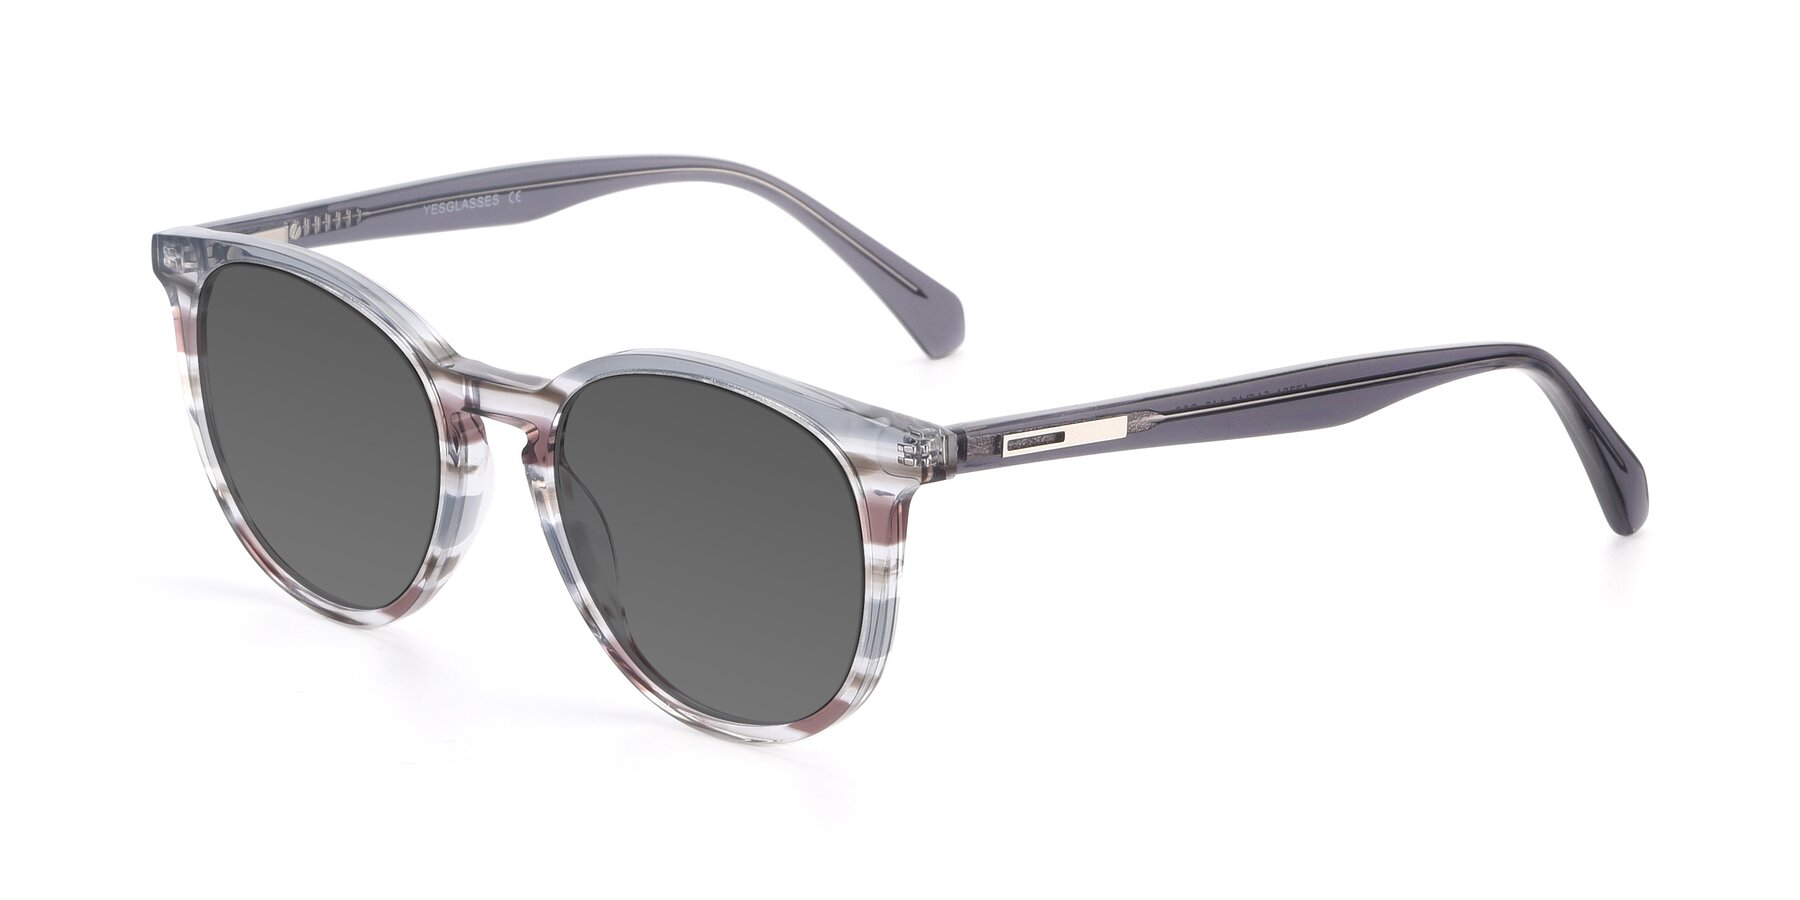 Angle of 17721 in Stripe Grey with Medium Gray Tinted Lenses